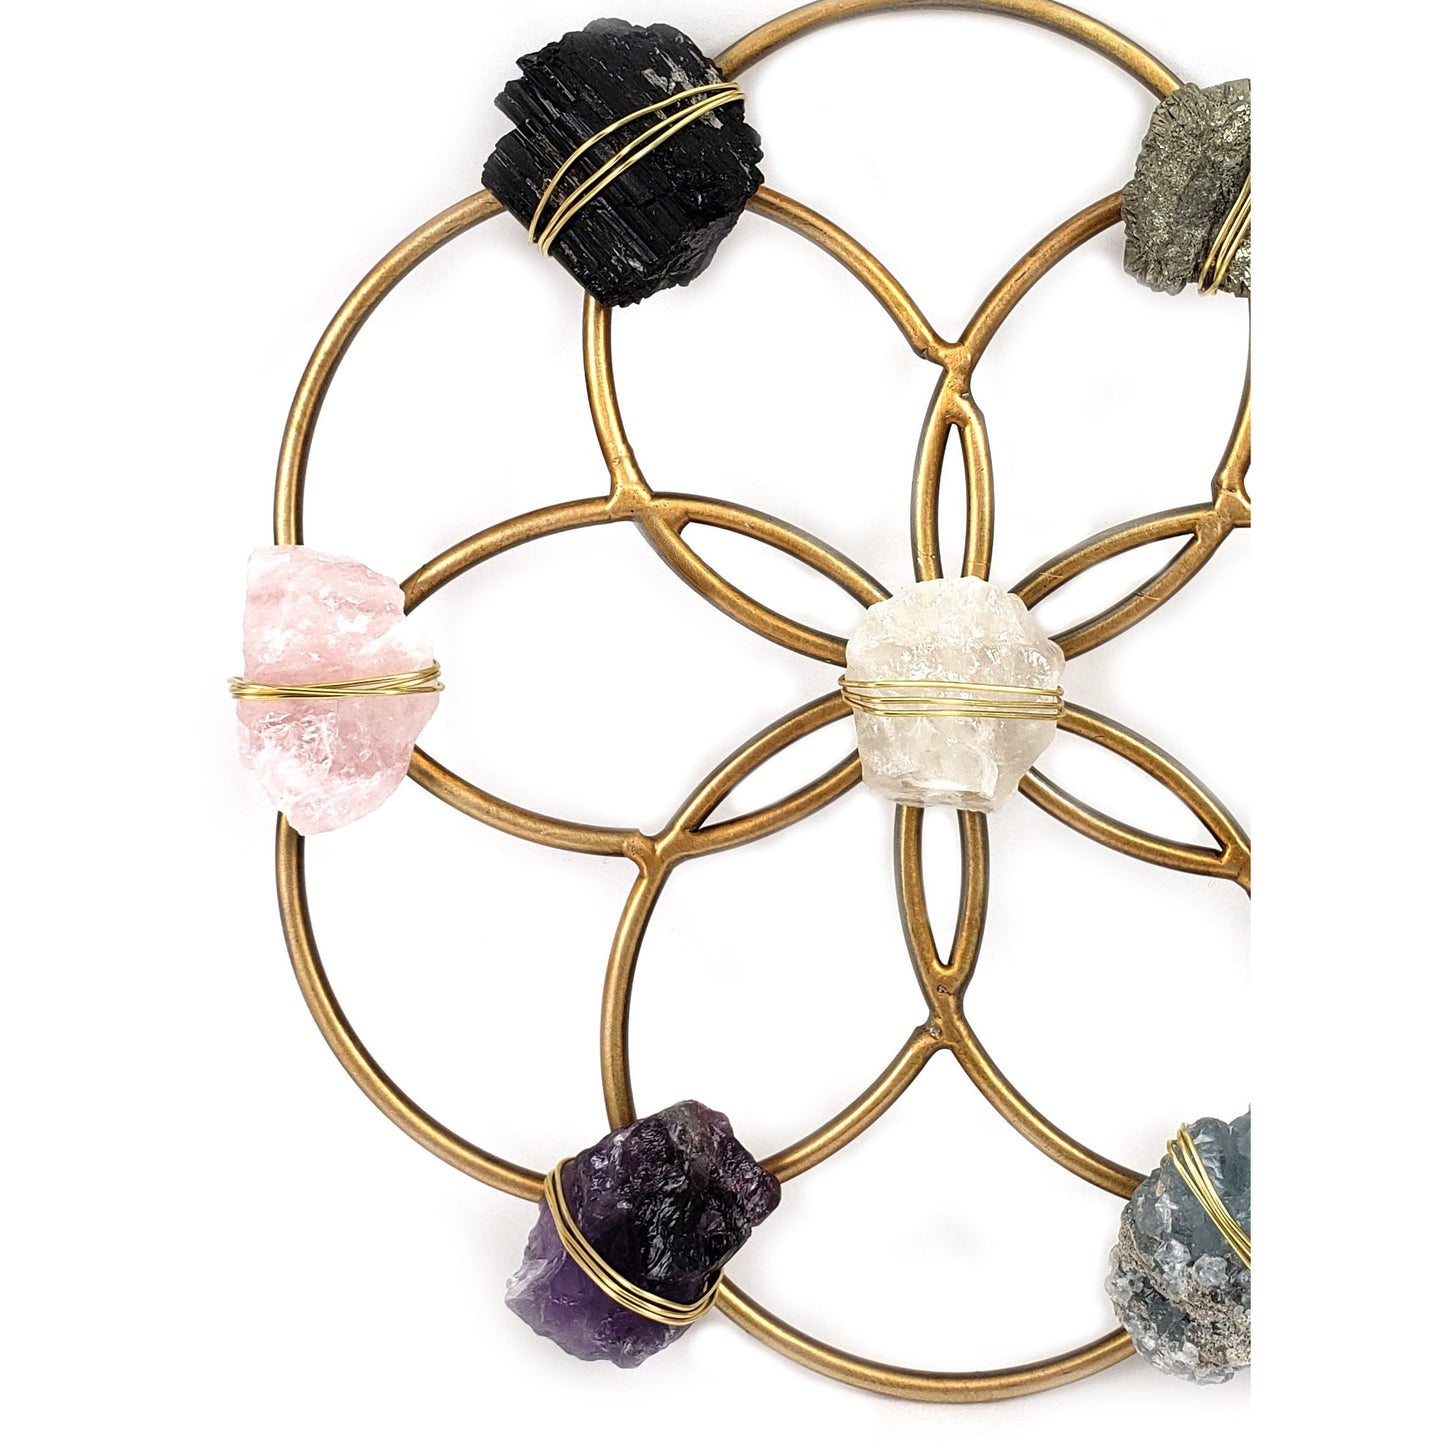 Small Flower of Life Healing Crystal Grid - Gold by Ariana Ost